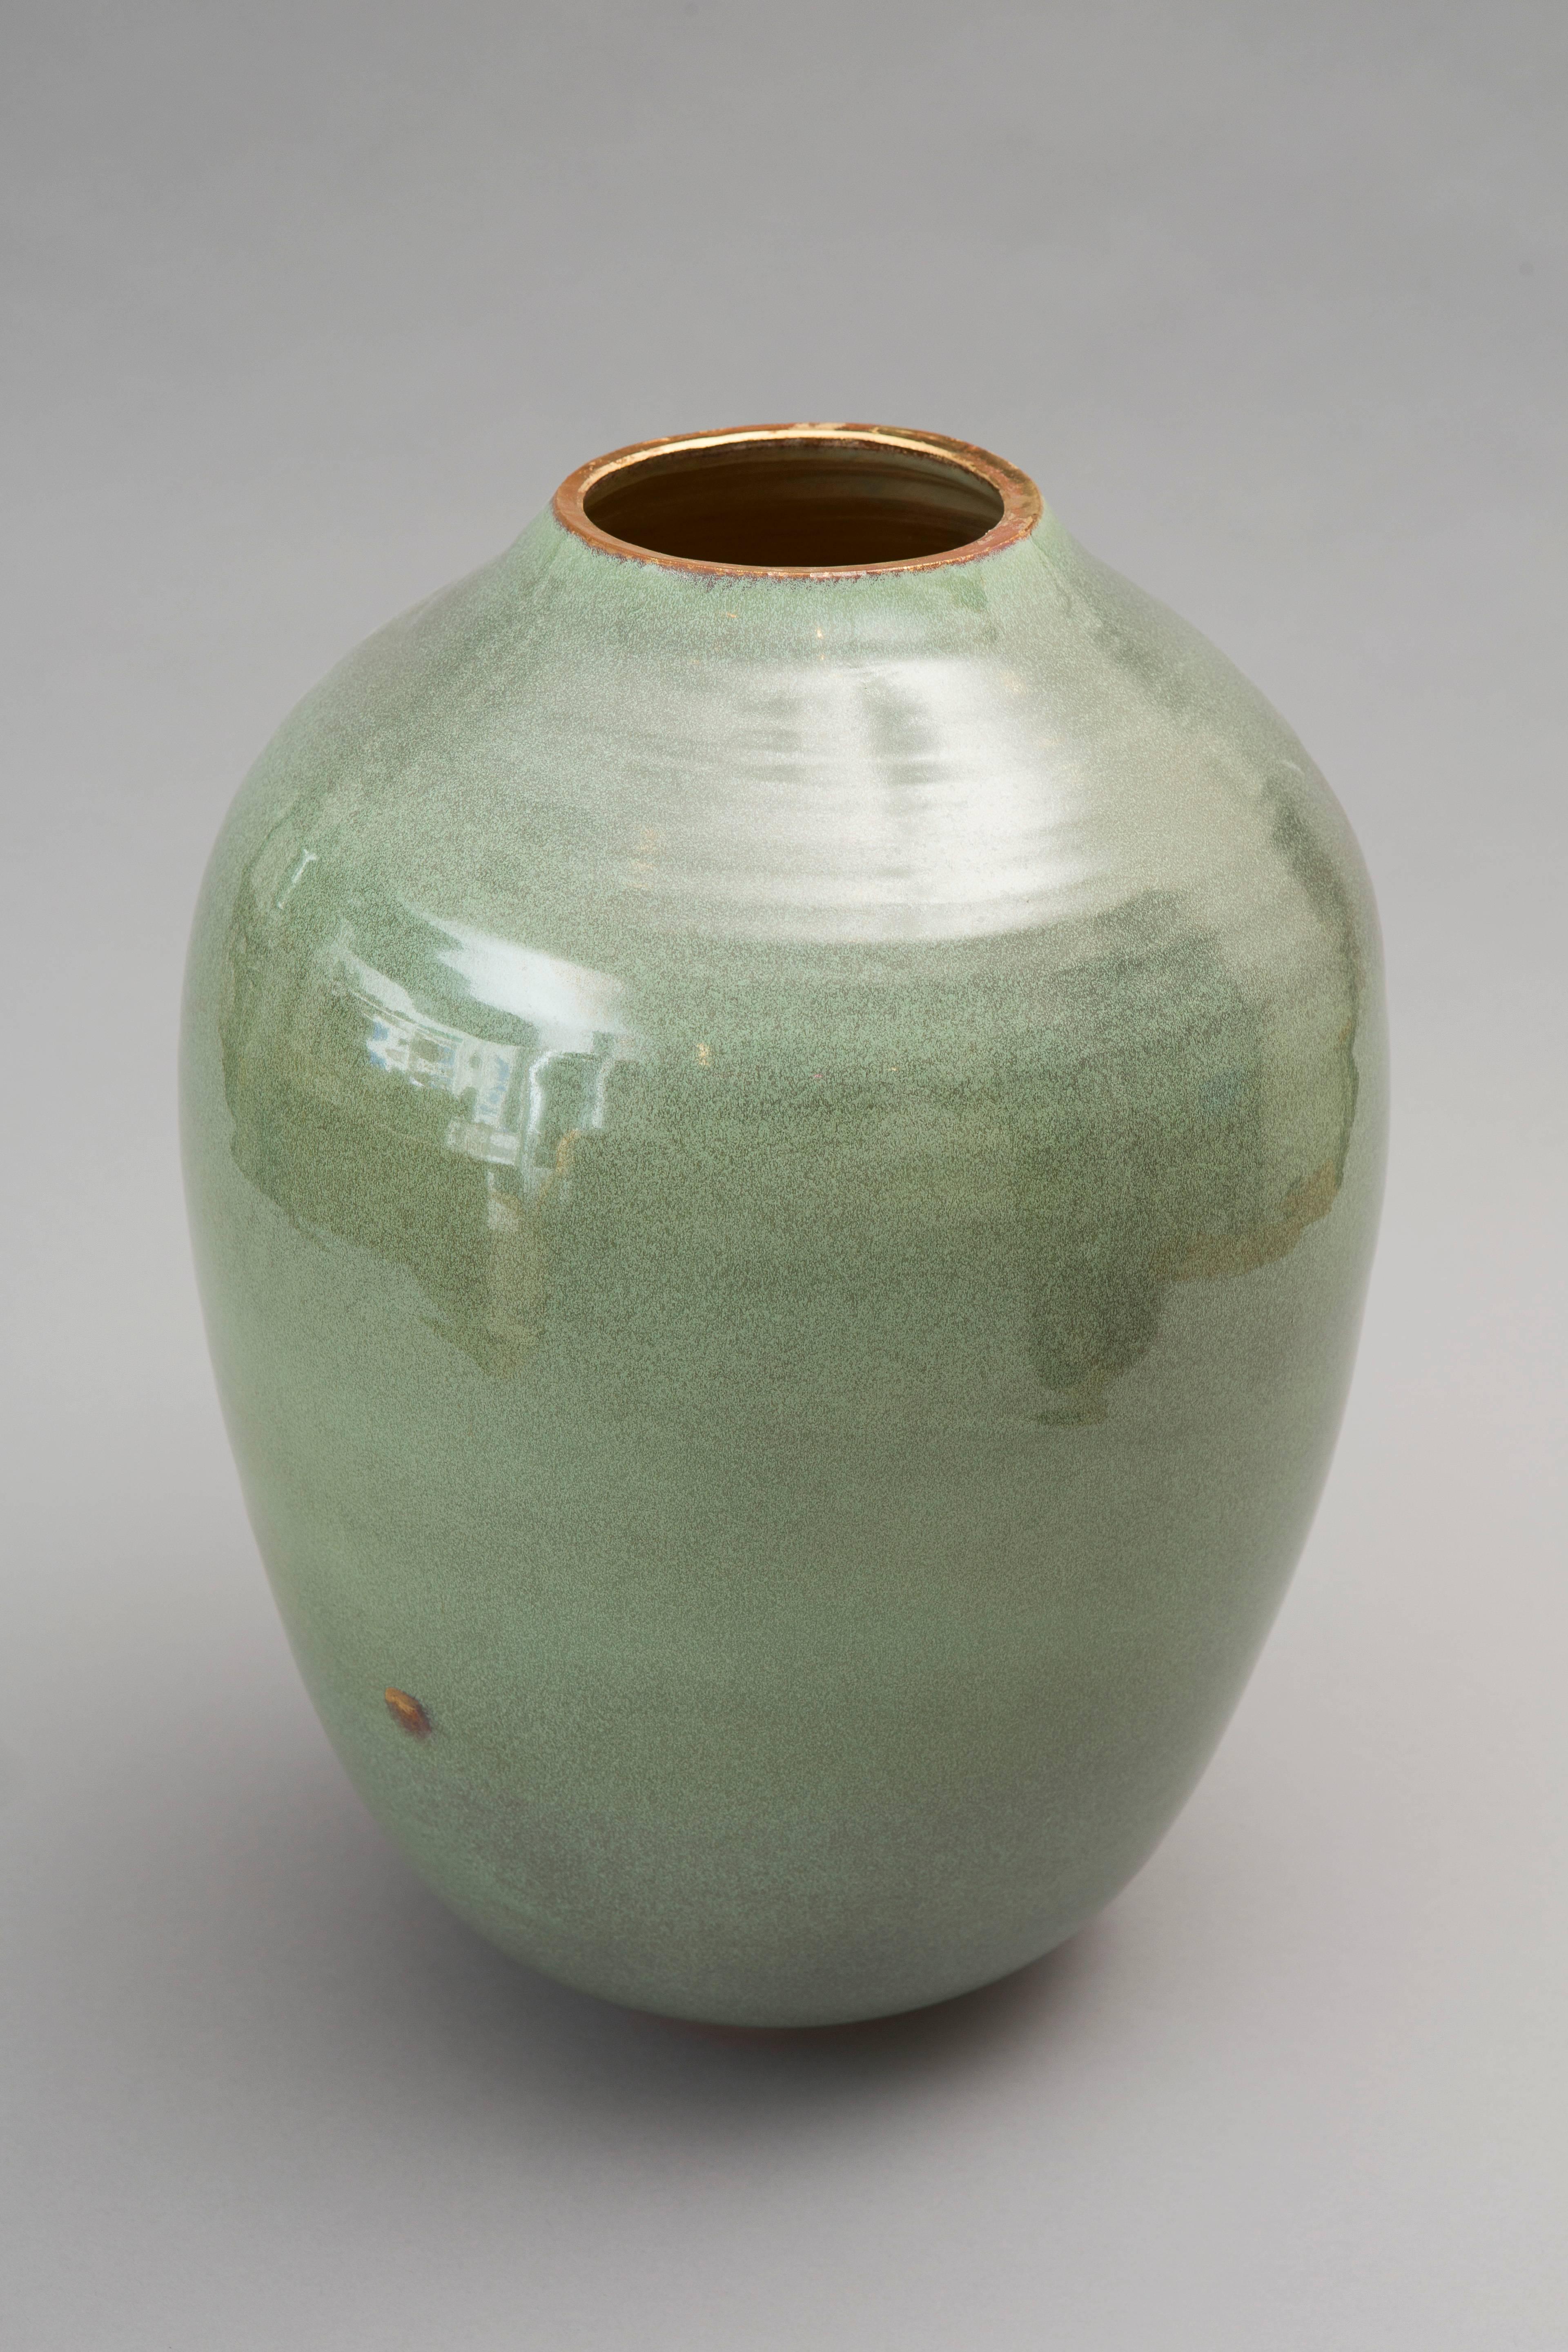 French Contemporary 2015, Green Celadon Vase, One of a Kind, Karen Swami For Sale